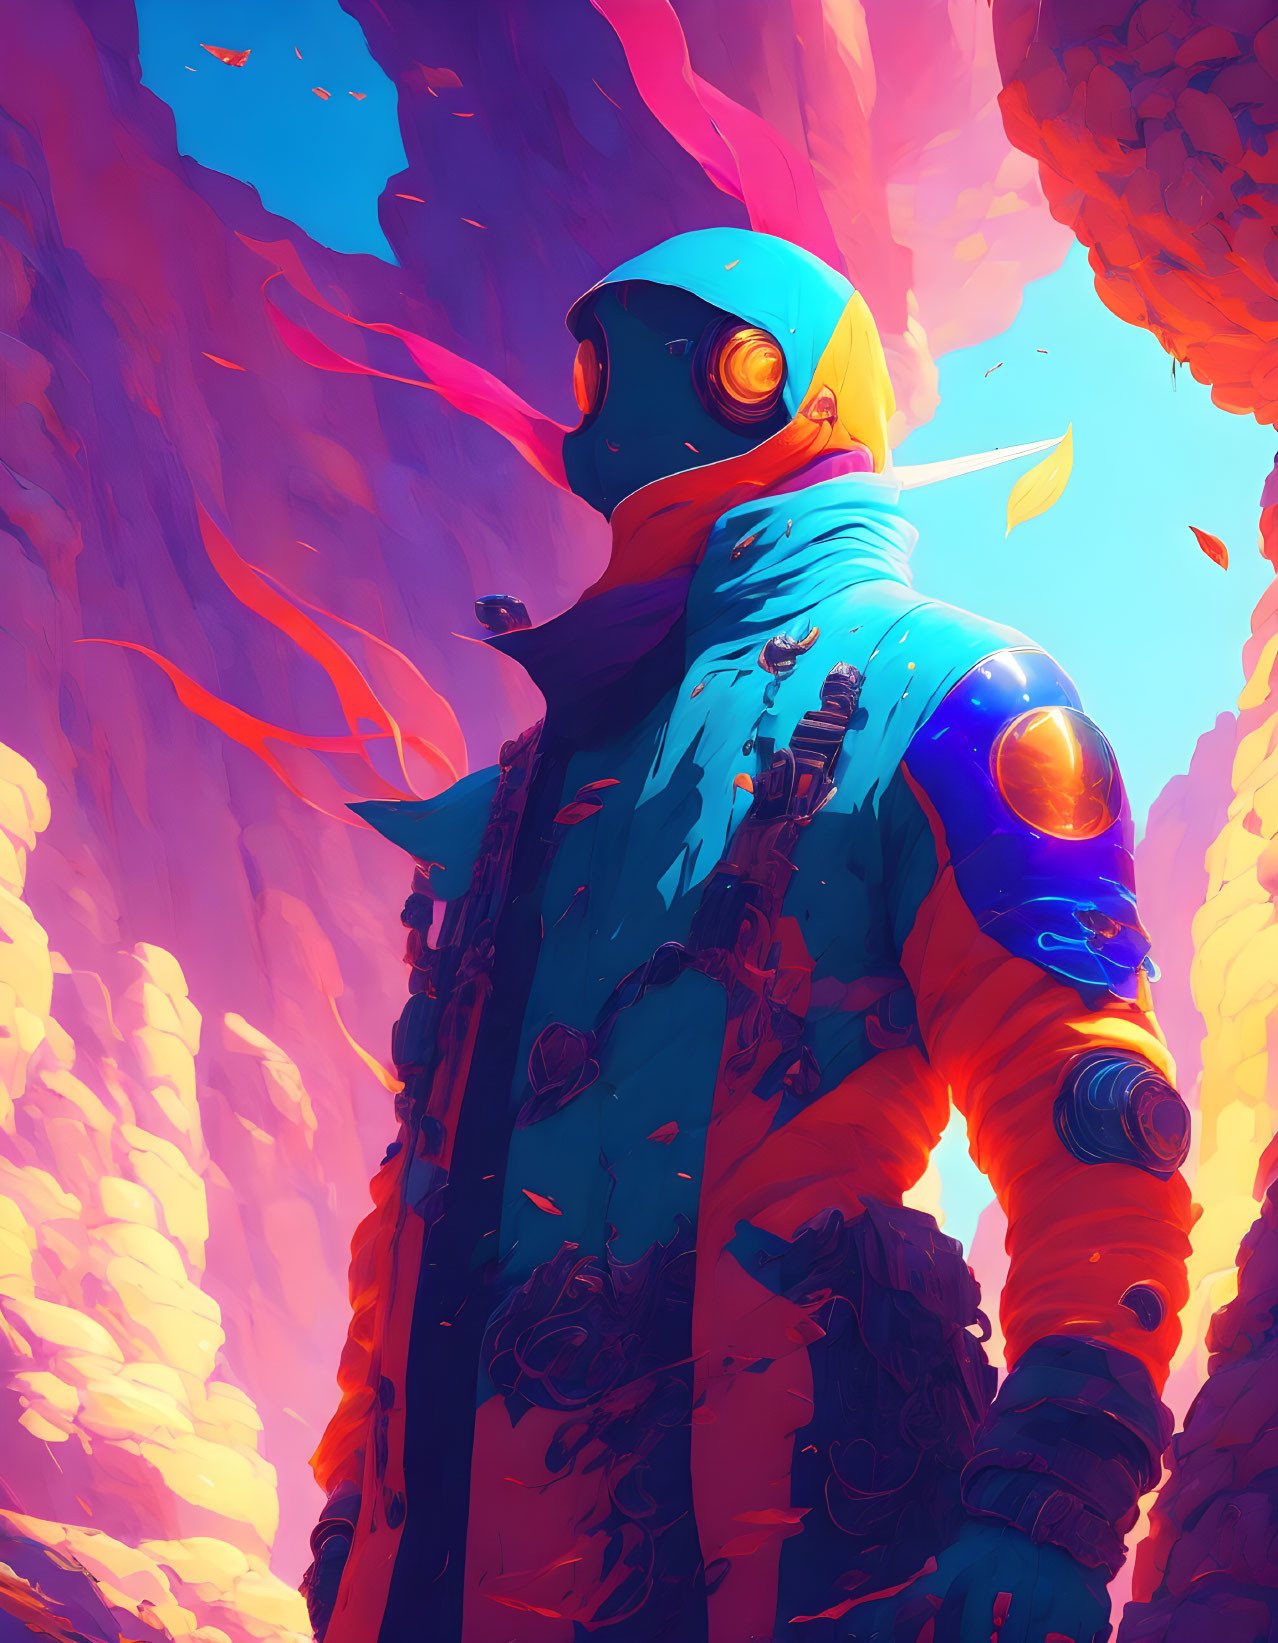 Colorful astronaut amidst surreal alien flora under pink and blue sky